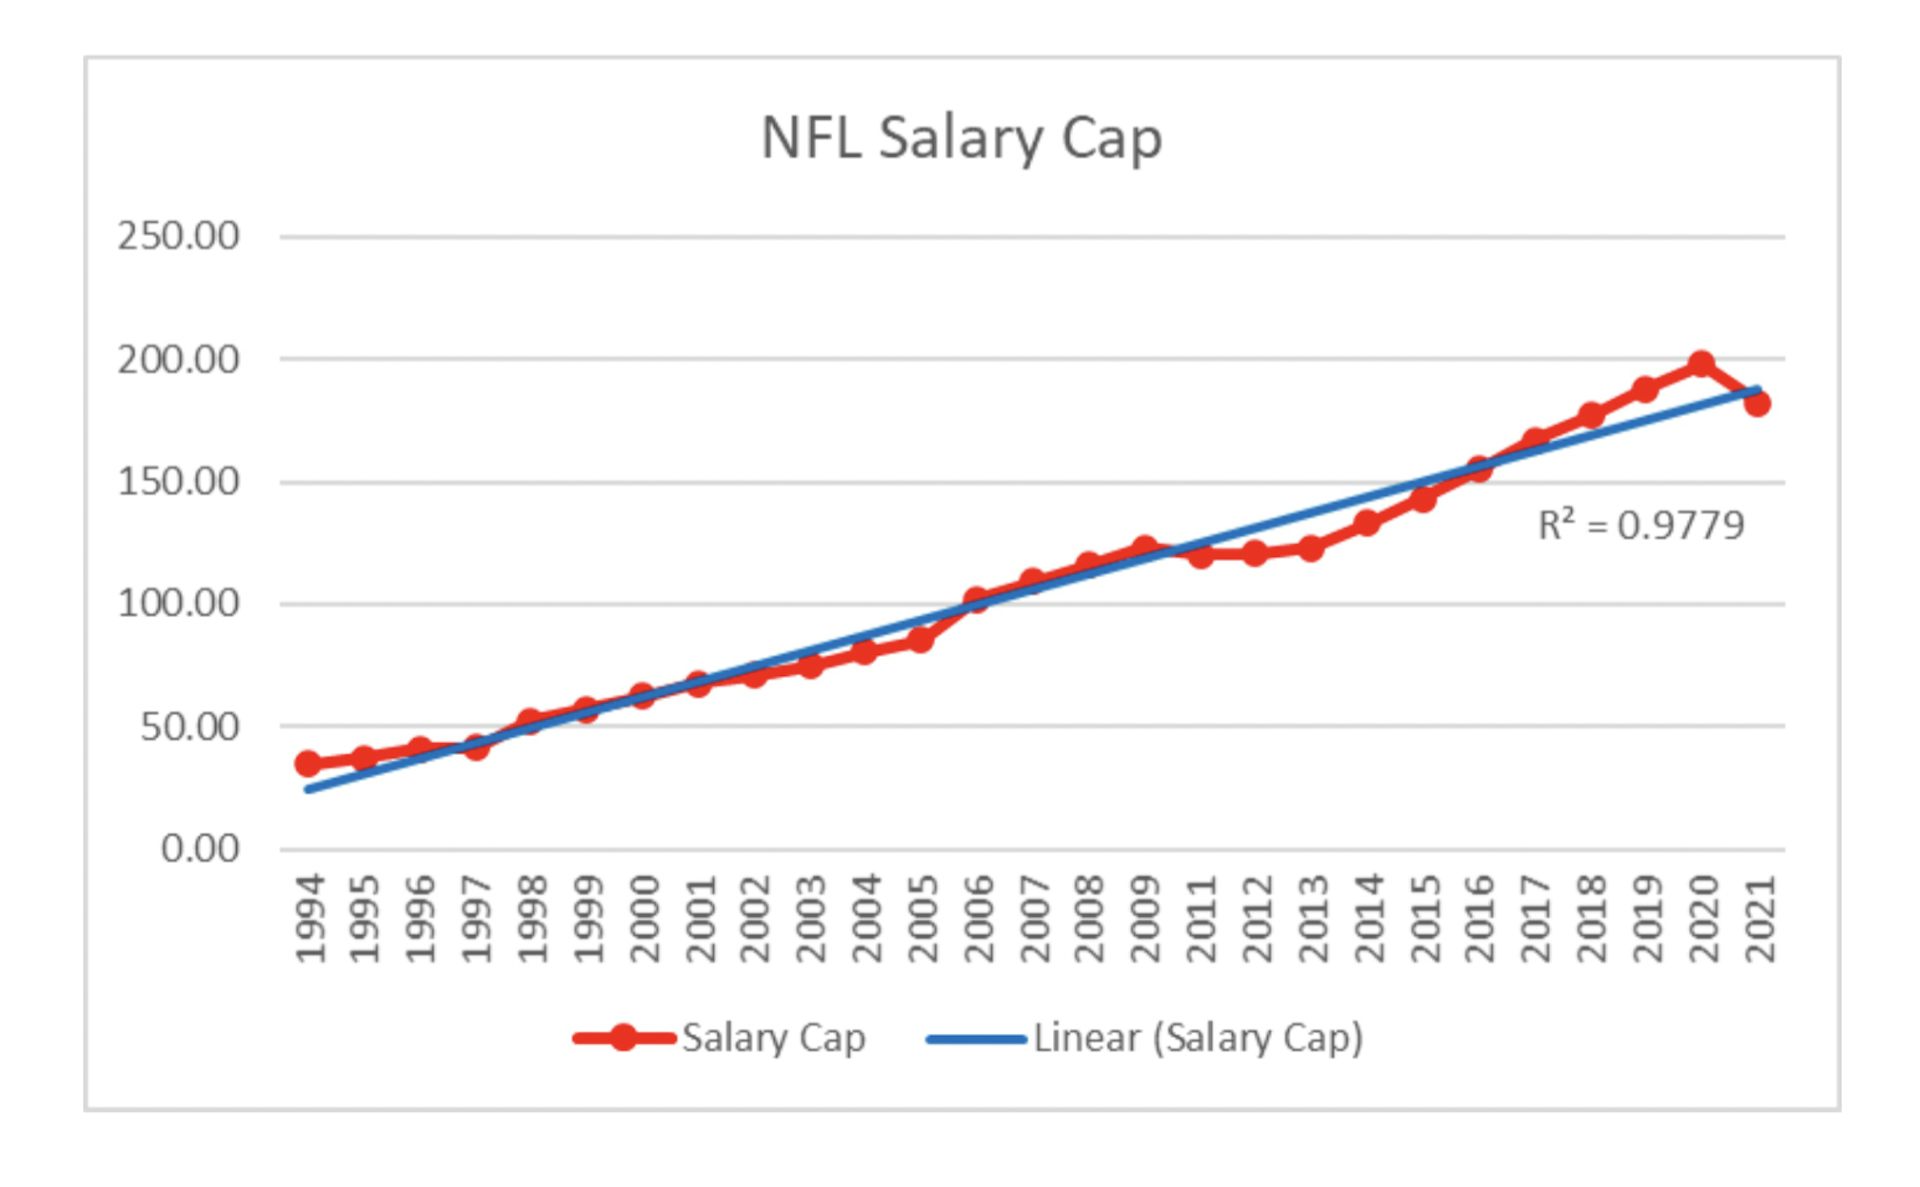 NFL and NHL salary caps have worked out 